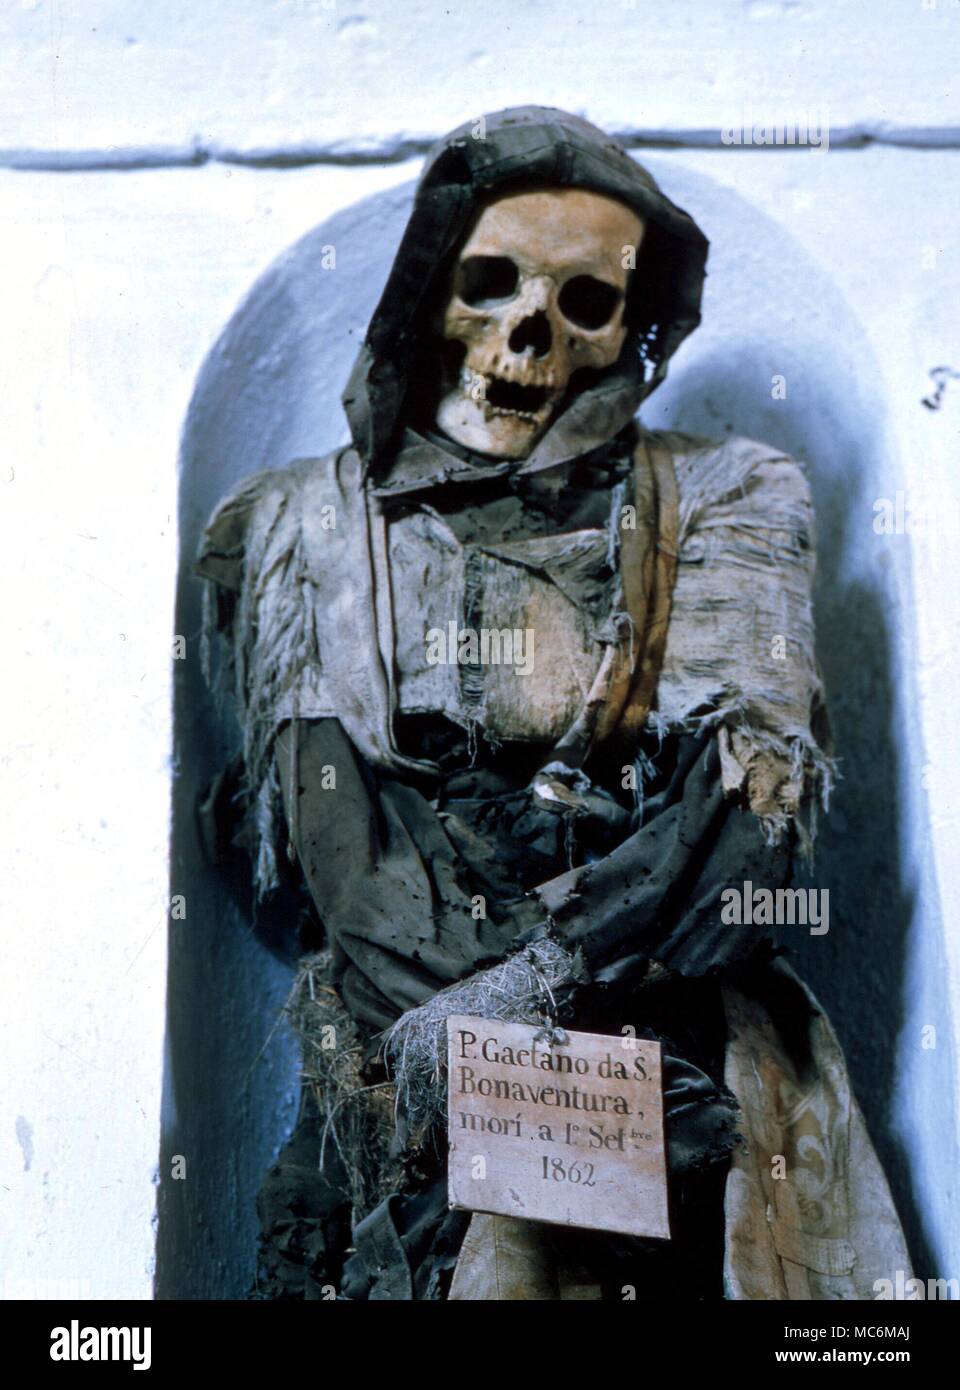 DEATH - Embalmed body of monk in the Catacoms of the Cappuccini, Palermo Stock Photo